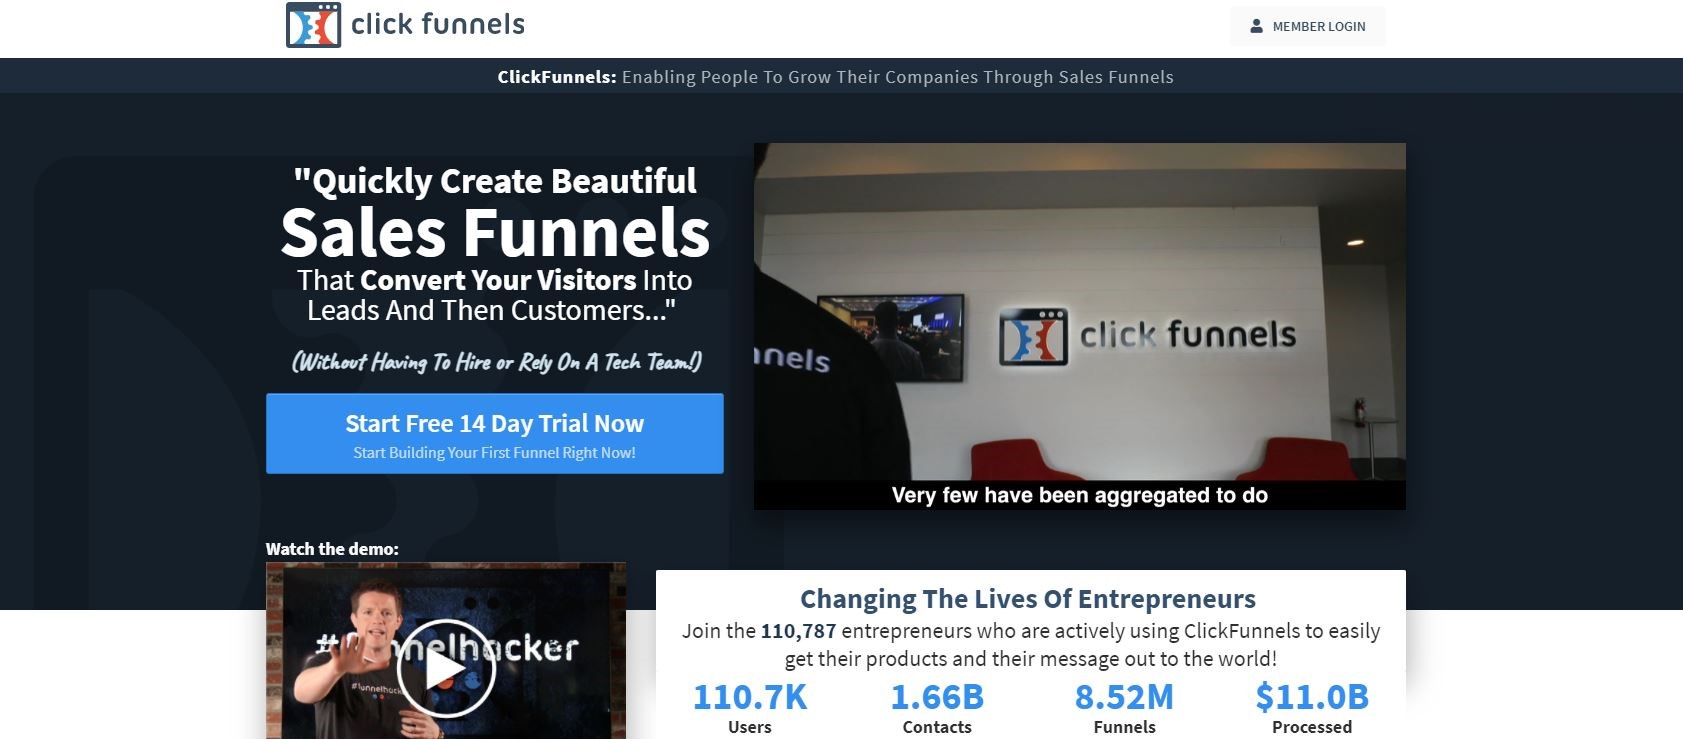 How To Add Members To Clickfunnels Course Things To Know Before You Buy